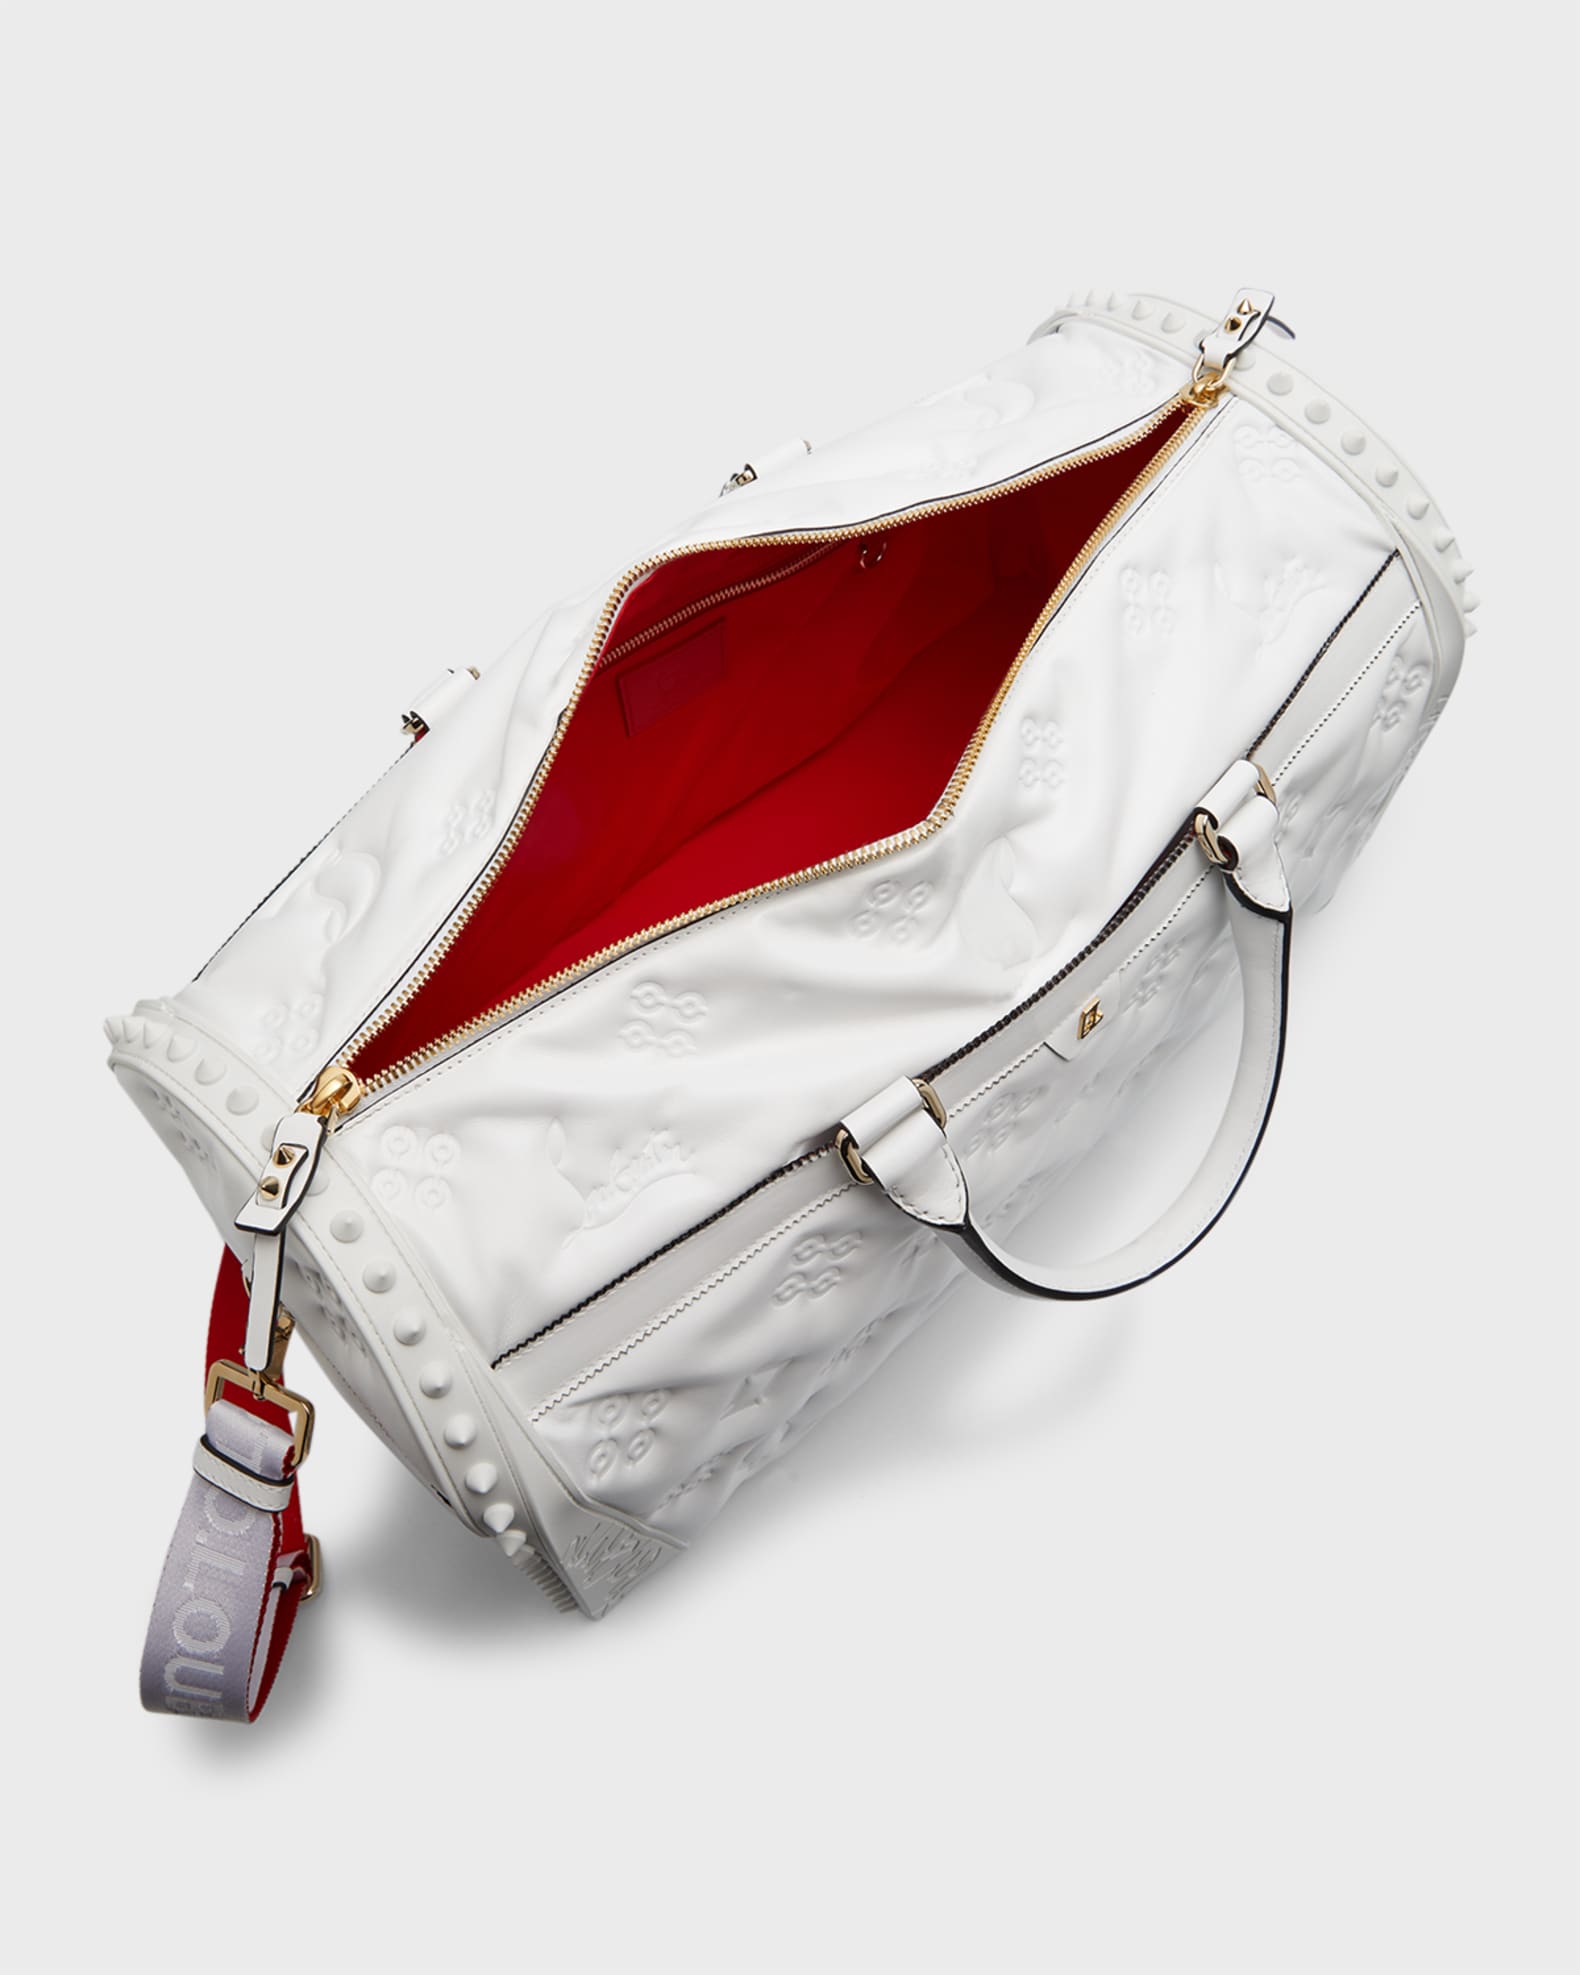 Sneakender Leather Duffle Bag in Multicoloured - Christian